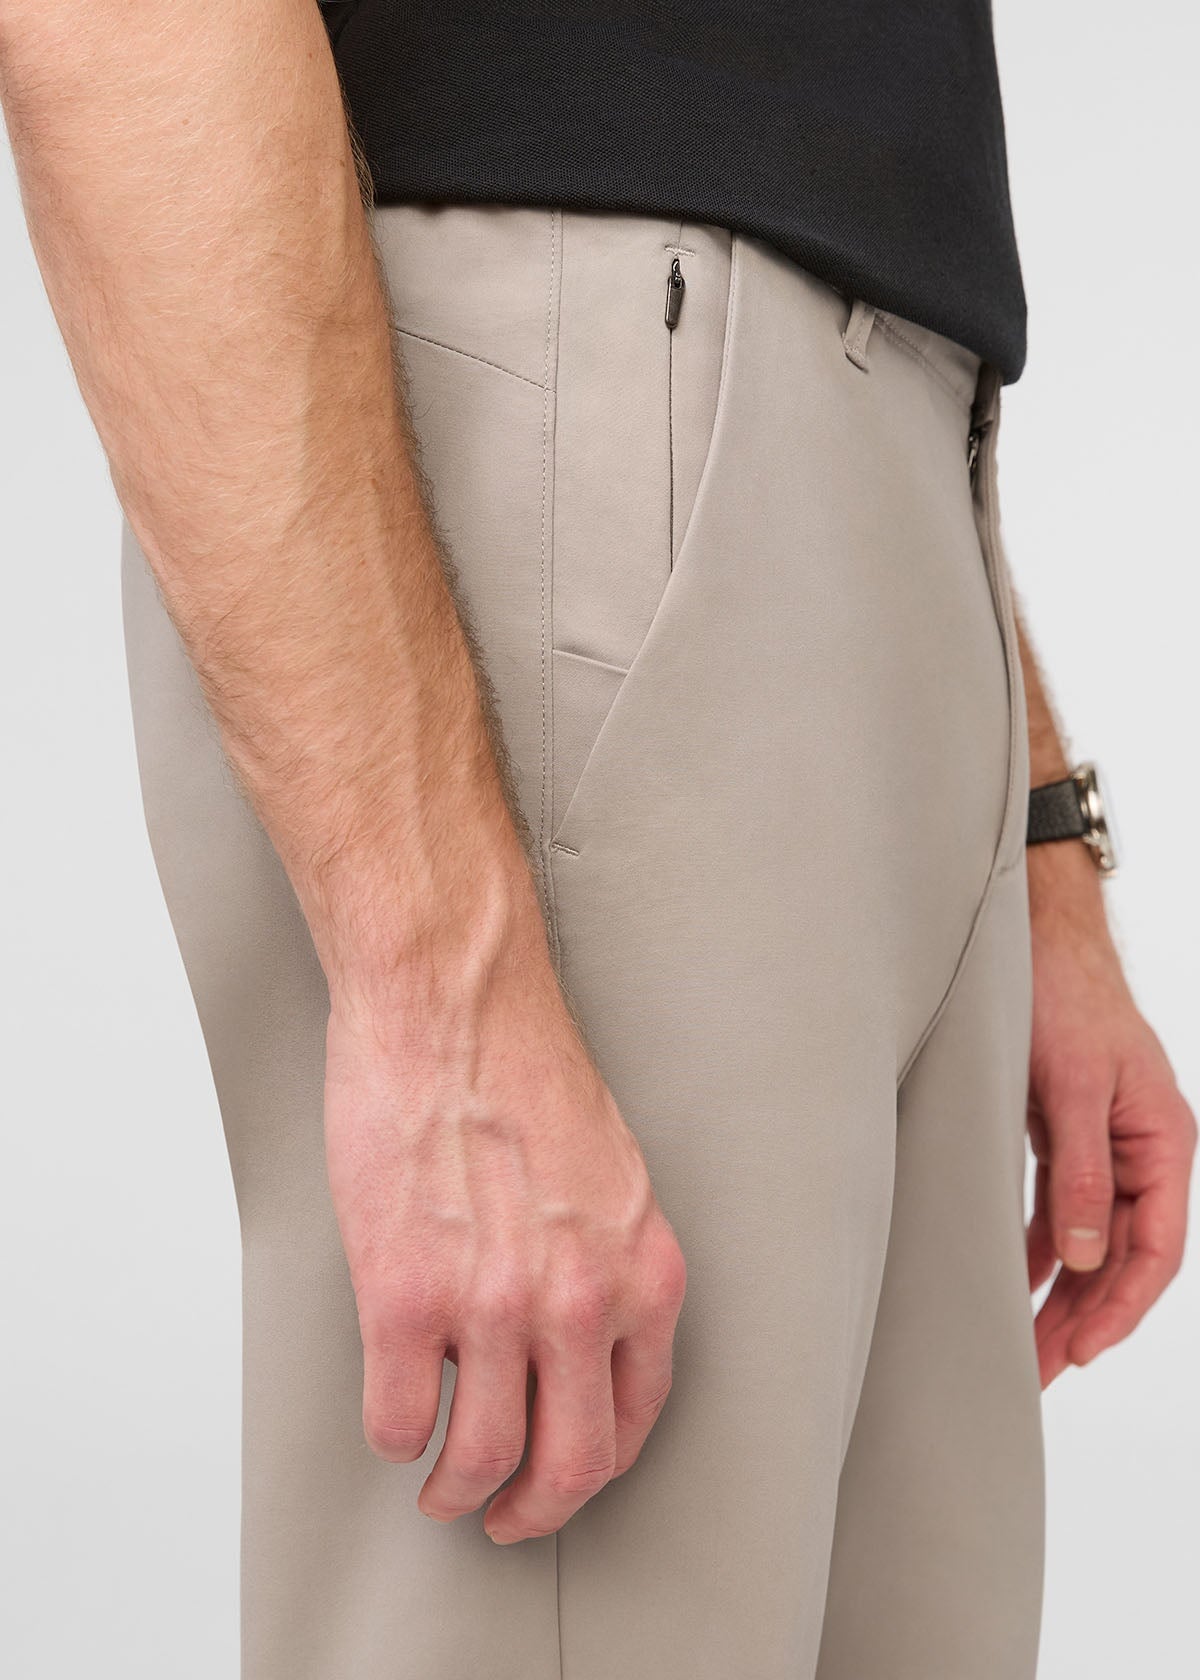 5 Best lululemon Pants for Men</a> (Joggers to Trousers) — Nomads